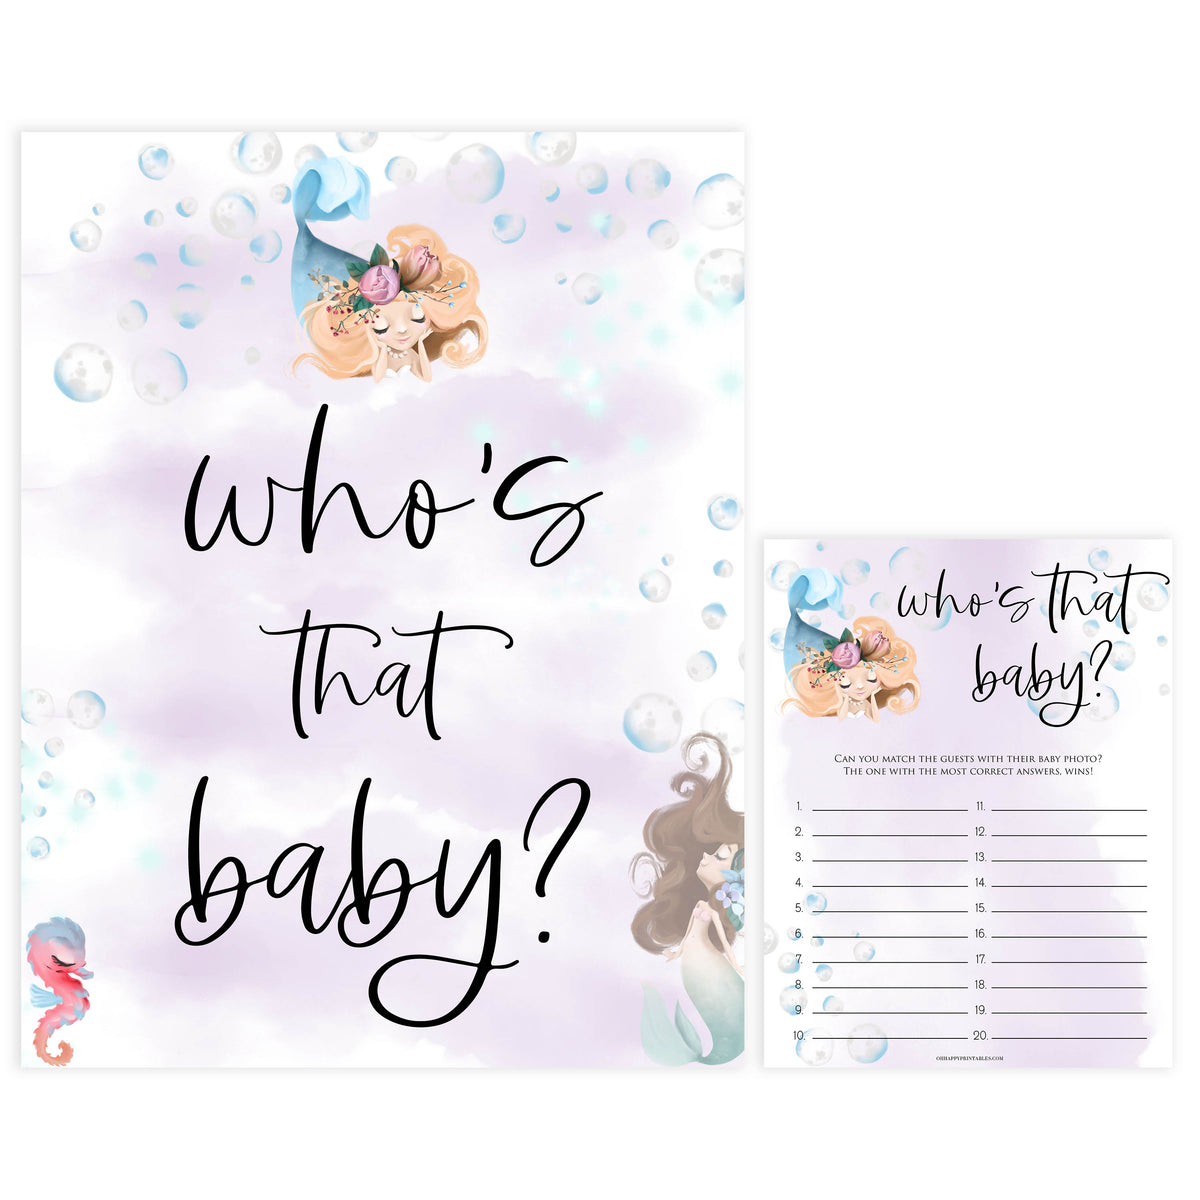 whos that baby game, guess the baby picture game, Printable baby shower games, little mermaid baby games, baby shower games, fun baby shower ideas, top baby shower ideas, little mermaid baby shower, baby shower games, pink hearts baby shower ideas